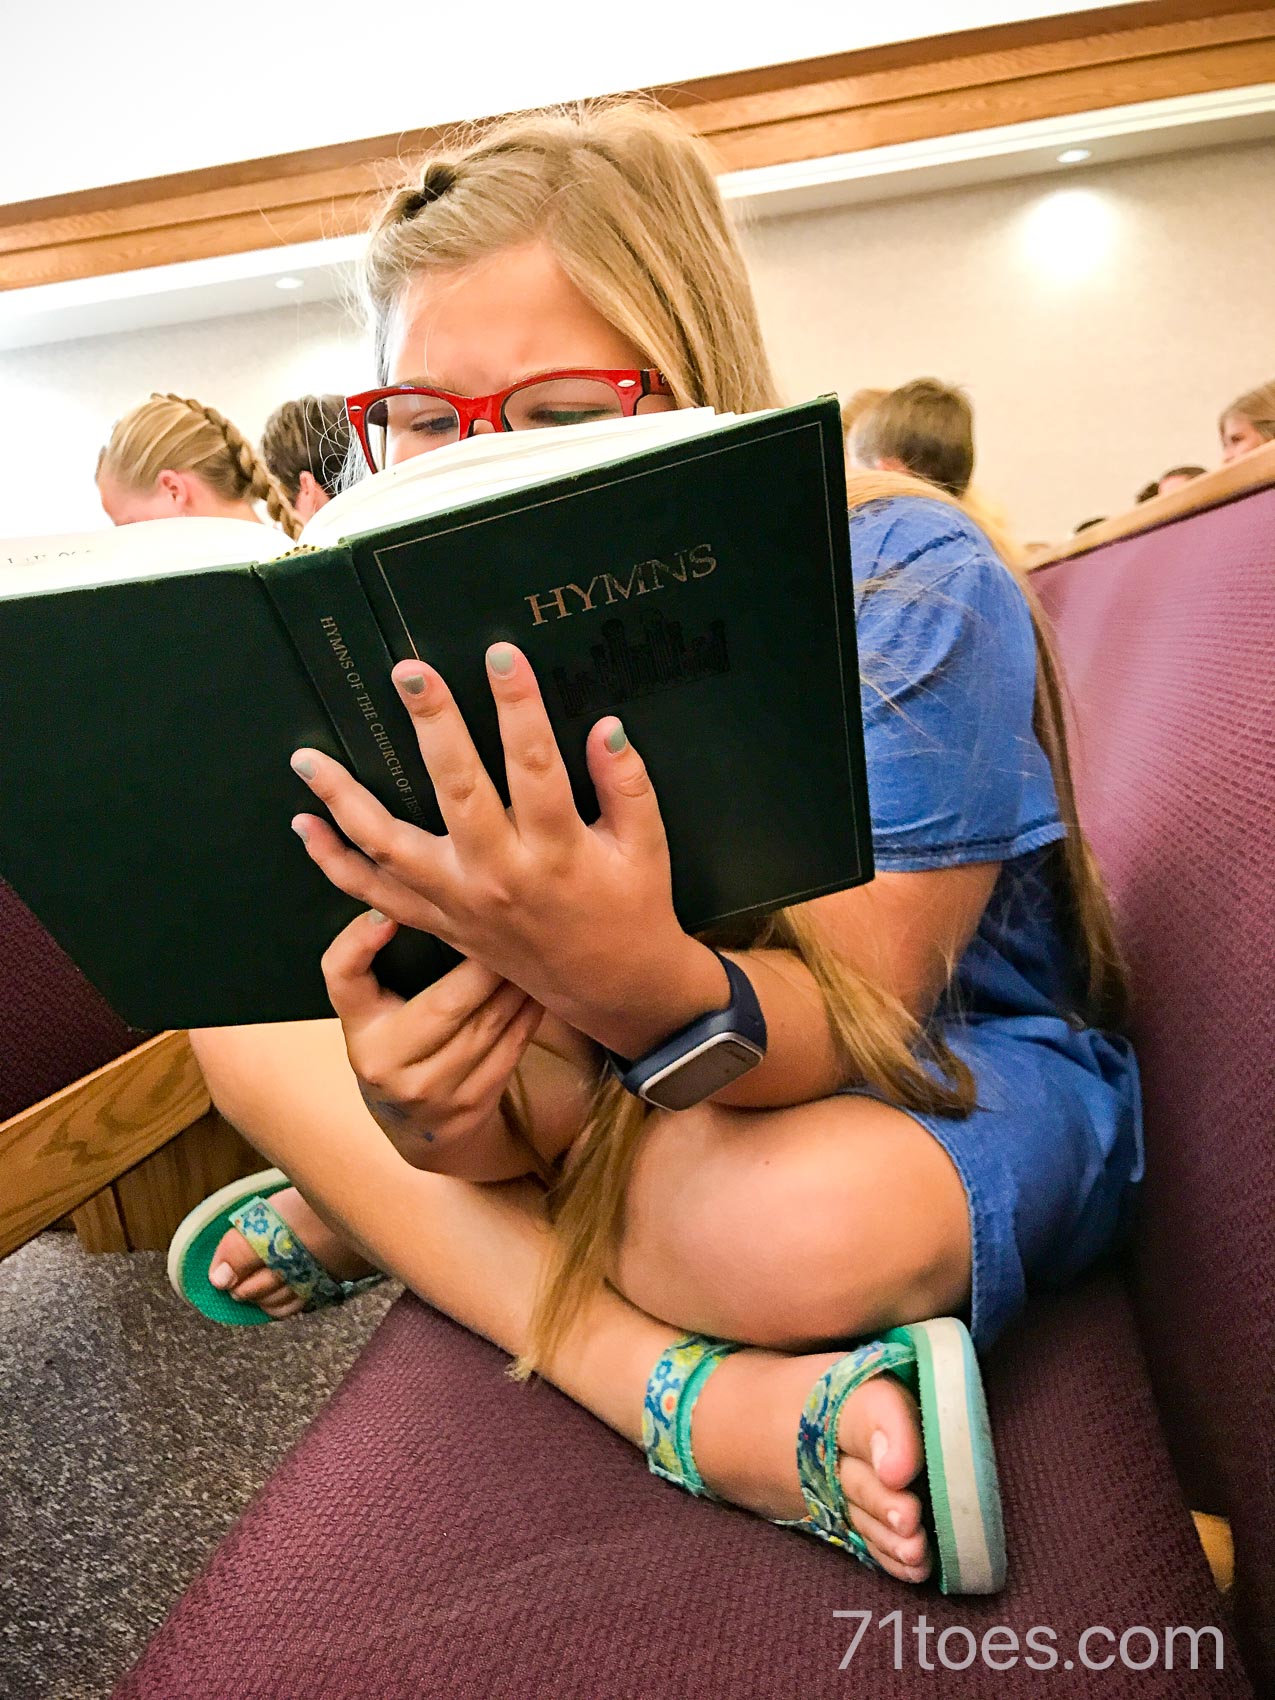 Lucy holding a hymn book at church